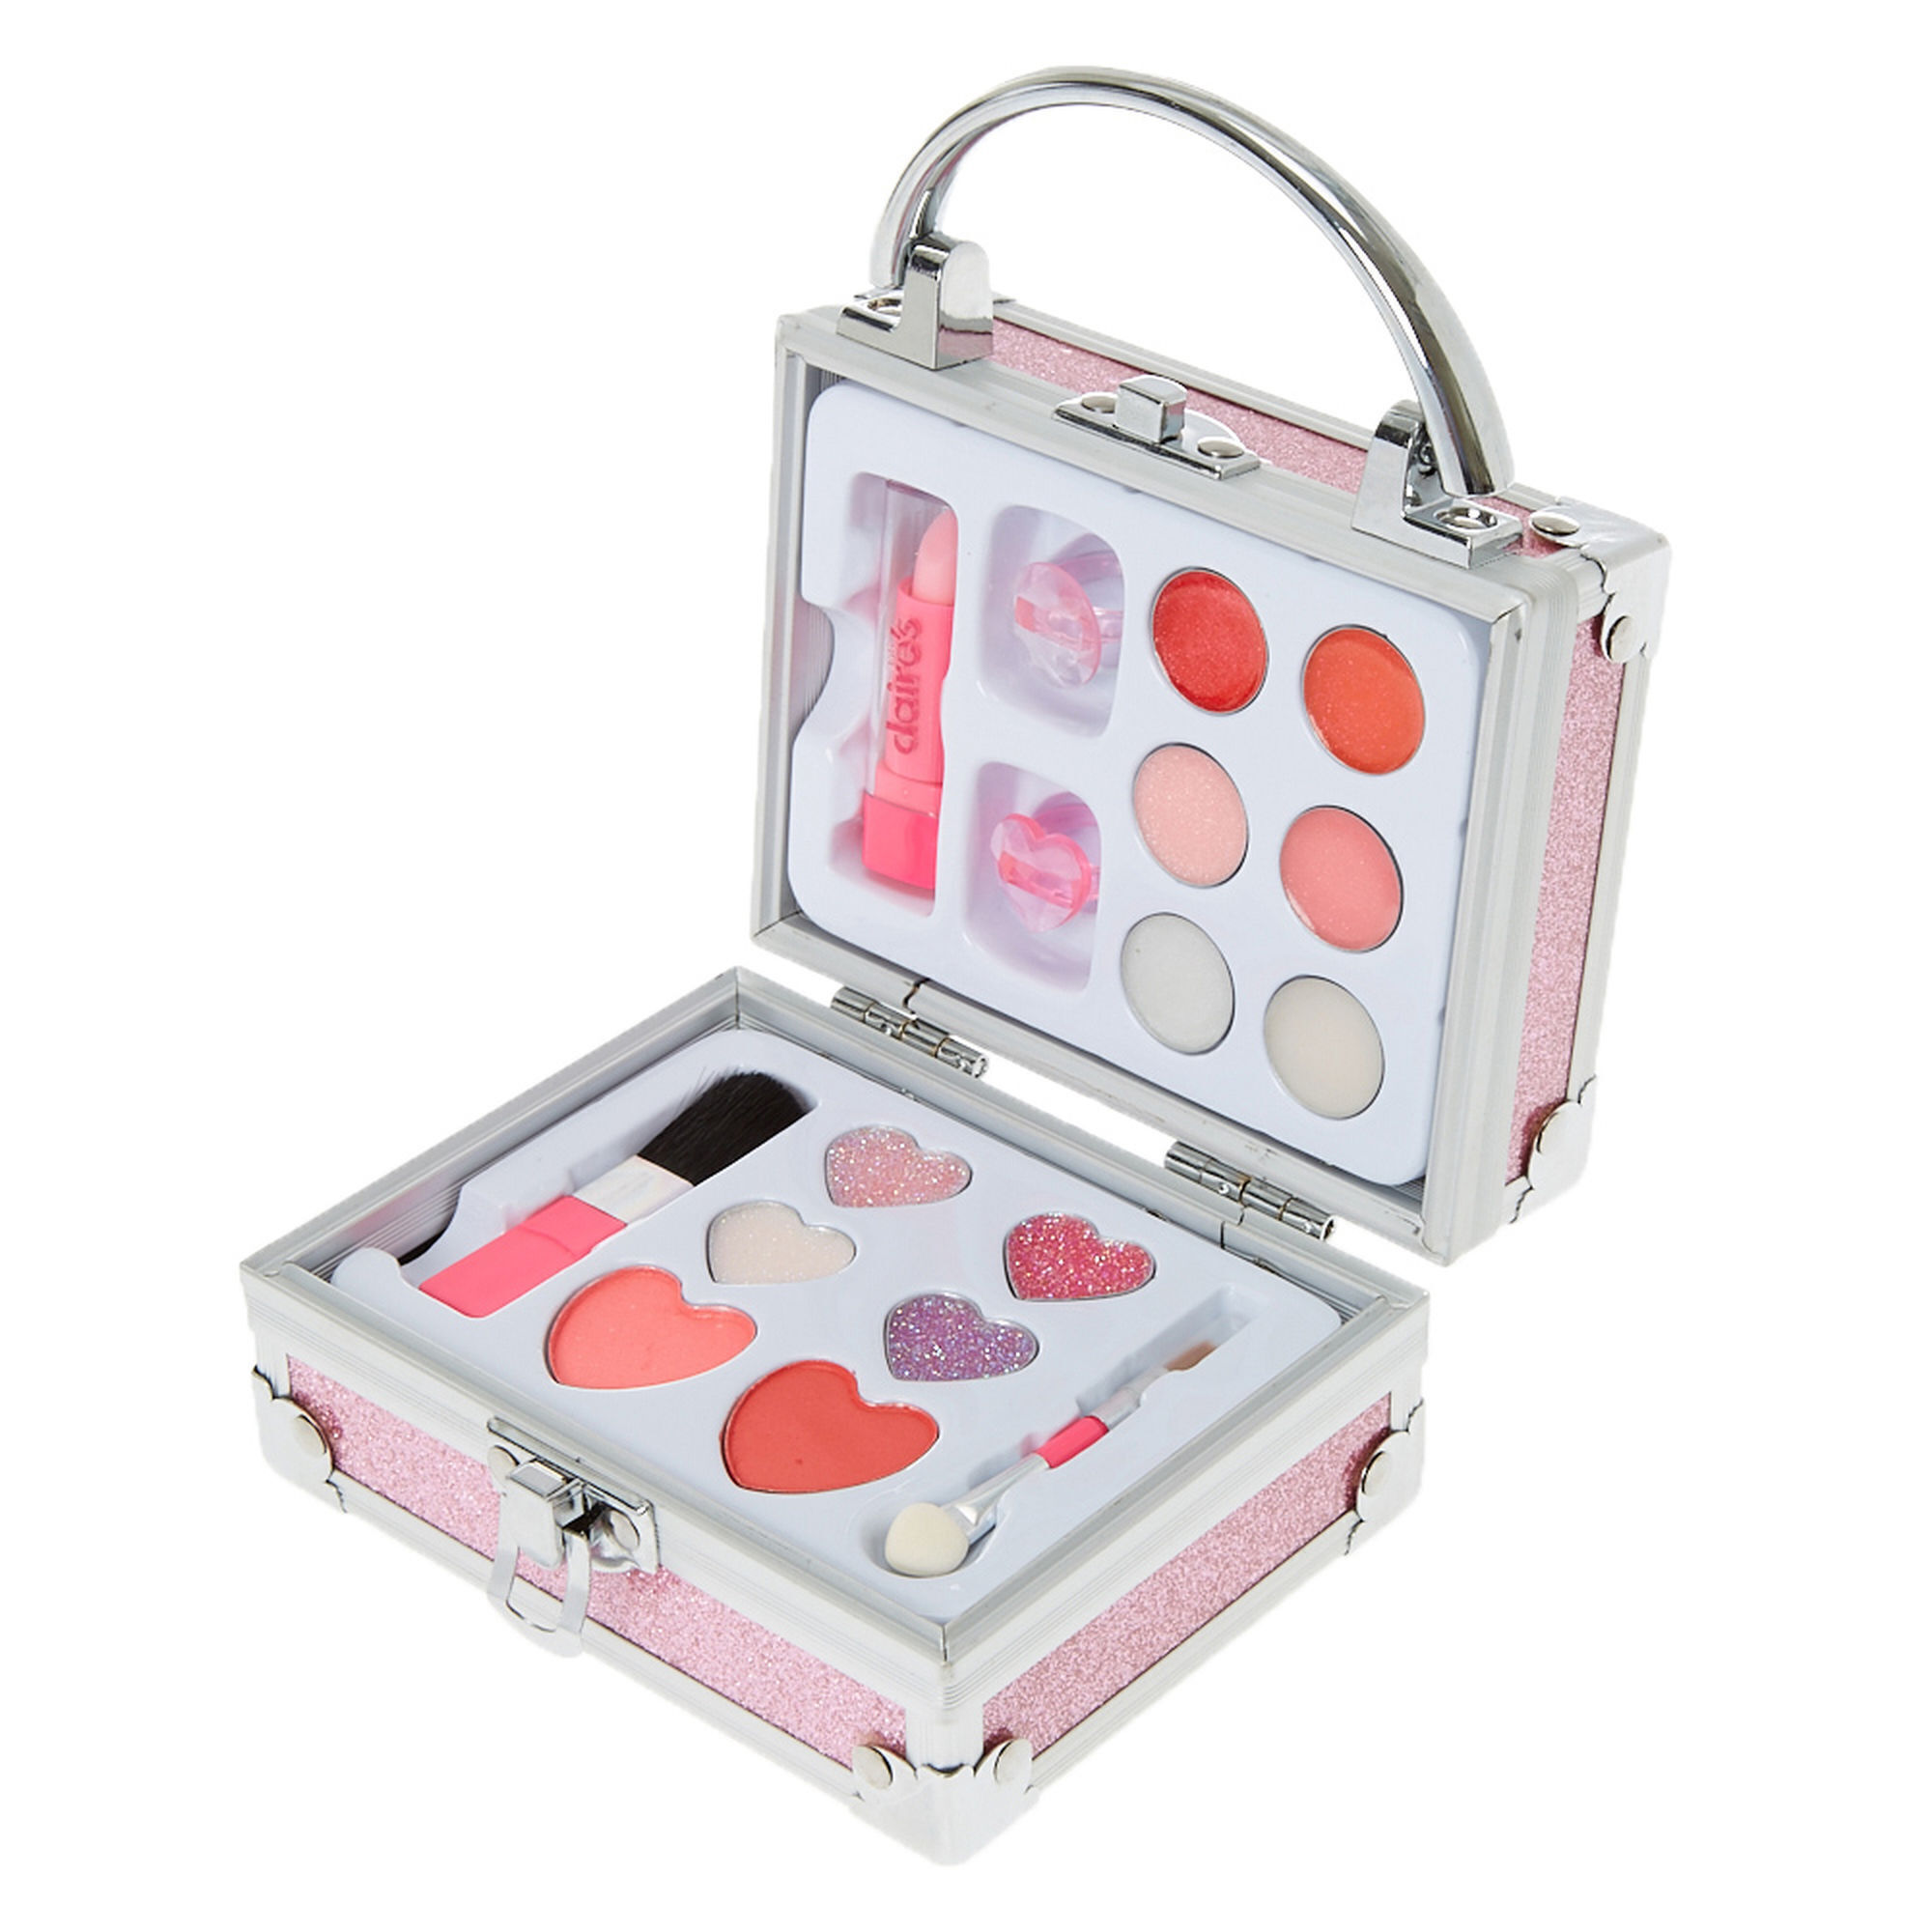 View Claires Club Glitter Lock Box Makeup Set Pink information